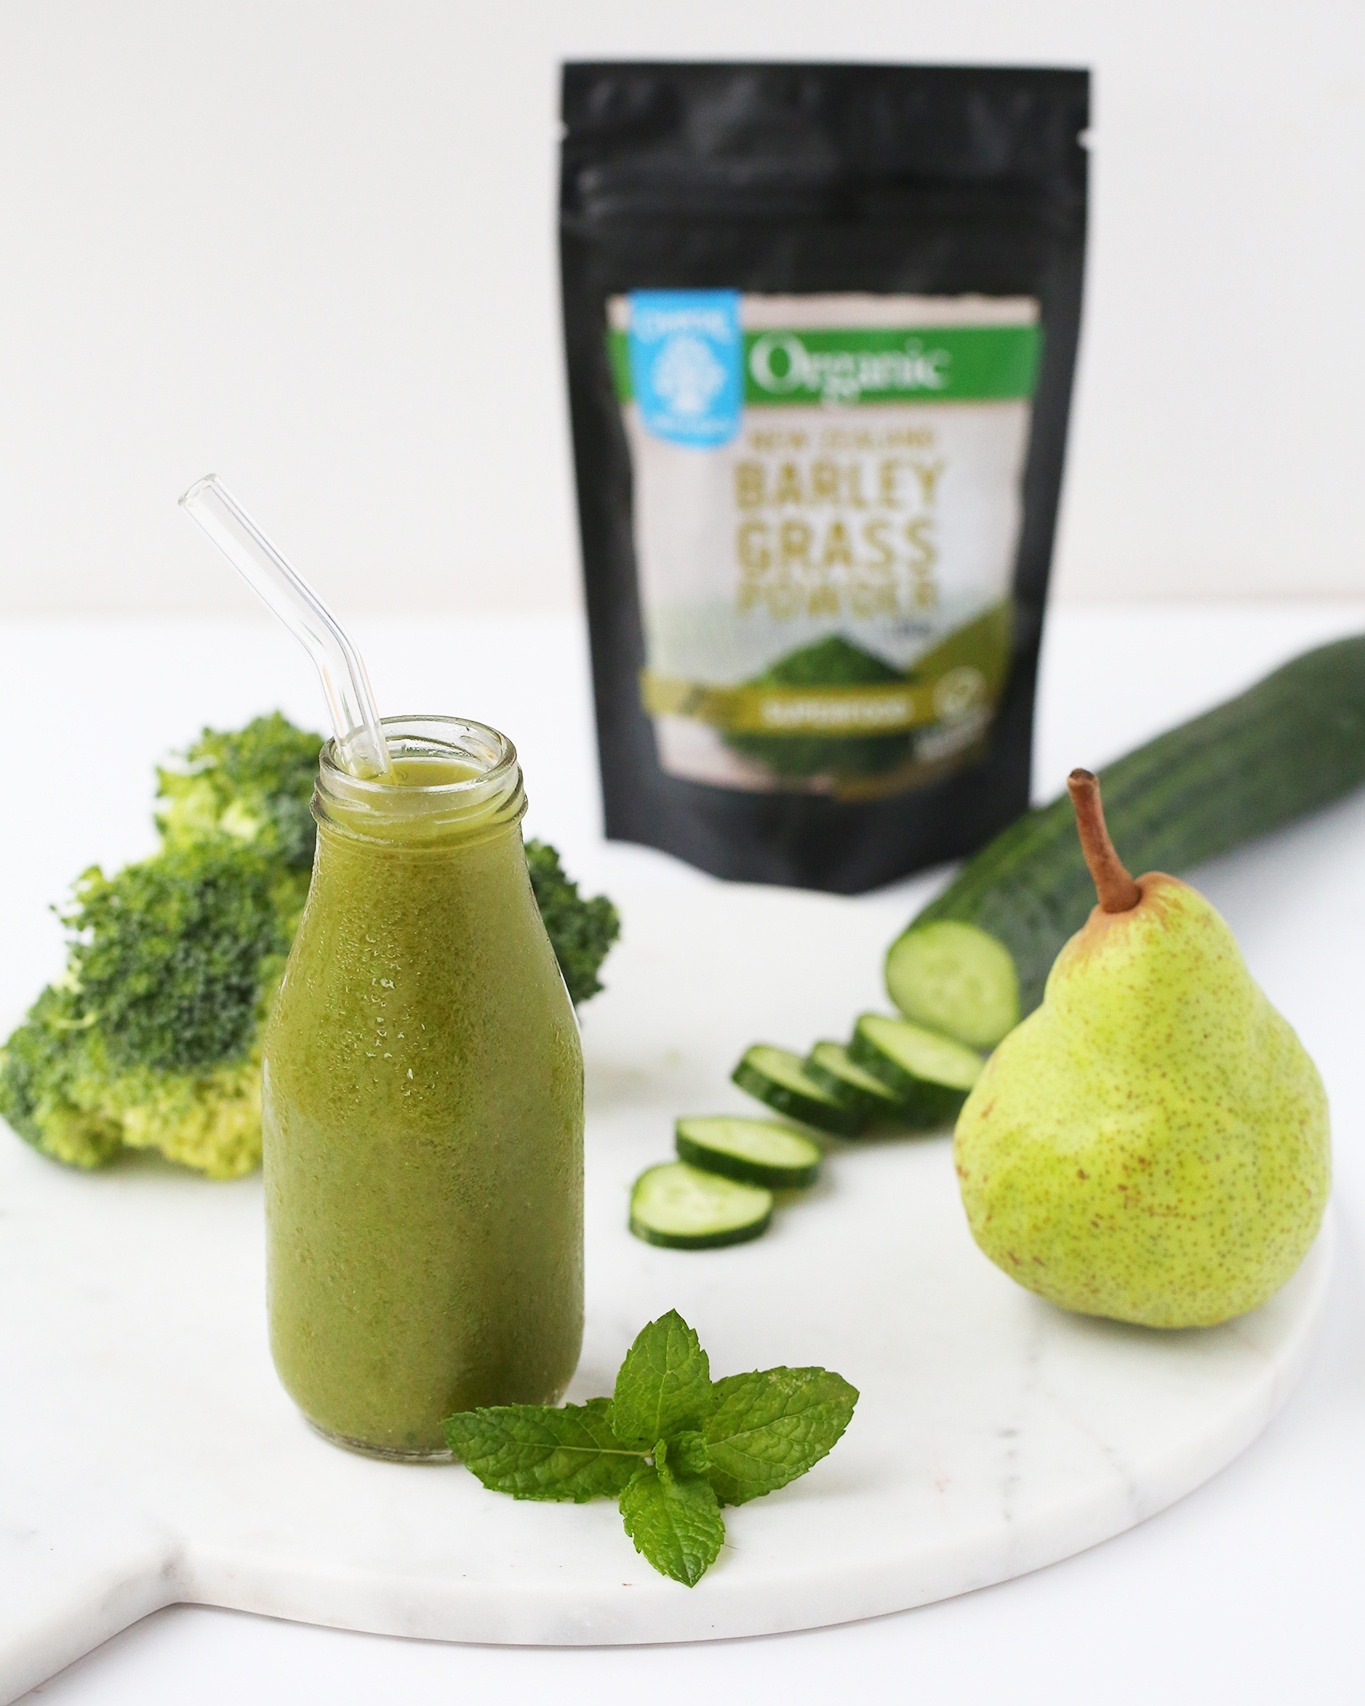 Green Juice with Barley-grass, Apple, Cucumber and Broccoli by Buffy Ellen from Be Good Organics
